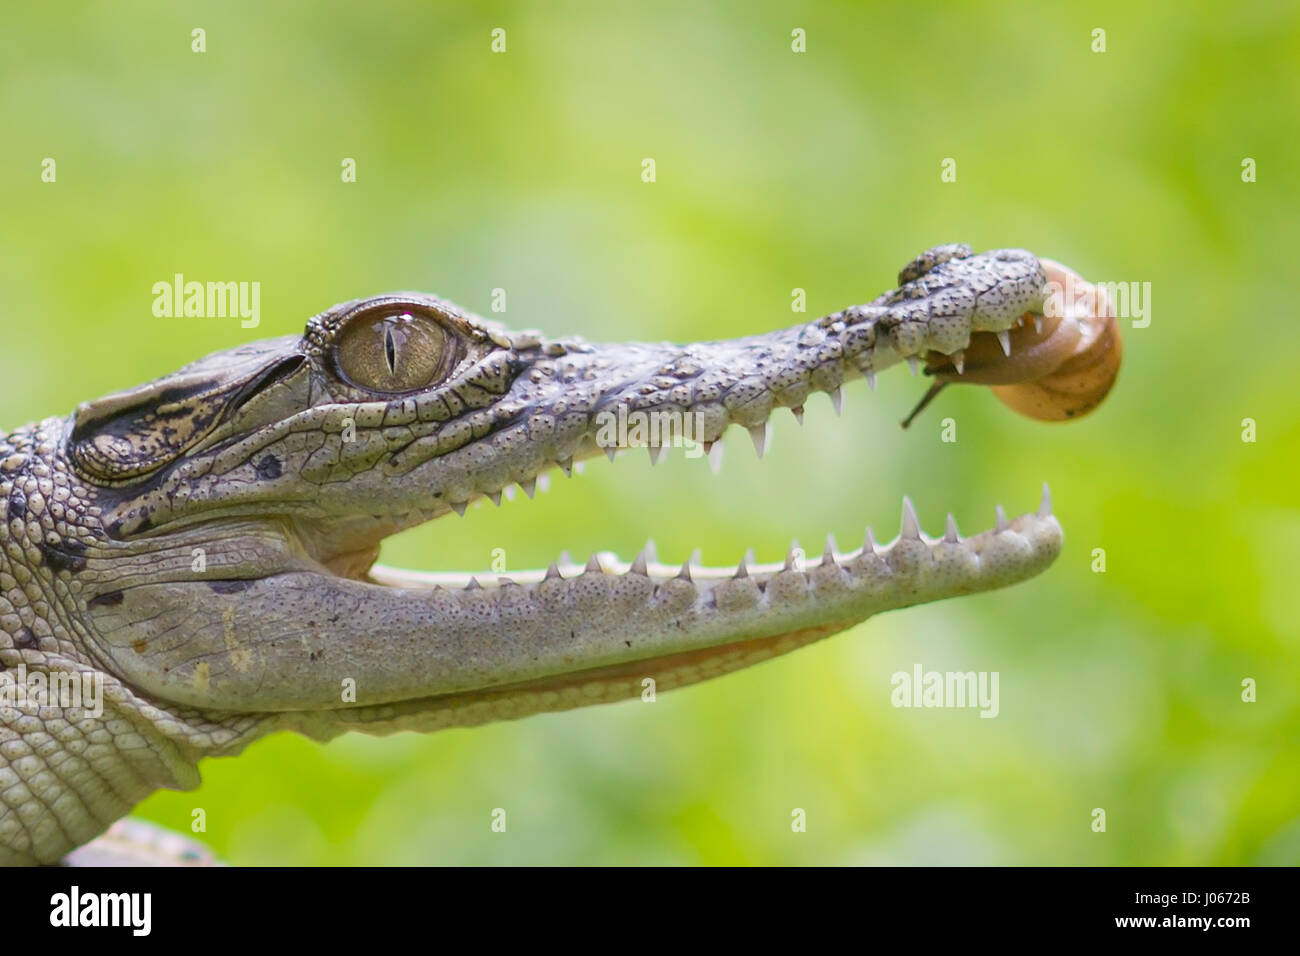 SOUTH JAKARTA, INDONESIA: HILARIOUS images show the moment a brave snail slowly ventured inside the open jaws of a crocodile. The series of unusual photos show the daring snail slither to the tip of the reptile’s nose before peering inside the its mouth and eventually moving inside. In one final shot, the snail can be seen resting on the roof of the croc’s mouth. The incredible photographs were taken by Roni Kurniawan (26) from Pondok Pinang, Jakarta, Indonesia just outside of South Jakarta. To take the photos, Roni used a Canon 600D camera. Roni Kurniawan / mediadrumworld.com Stock Photo